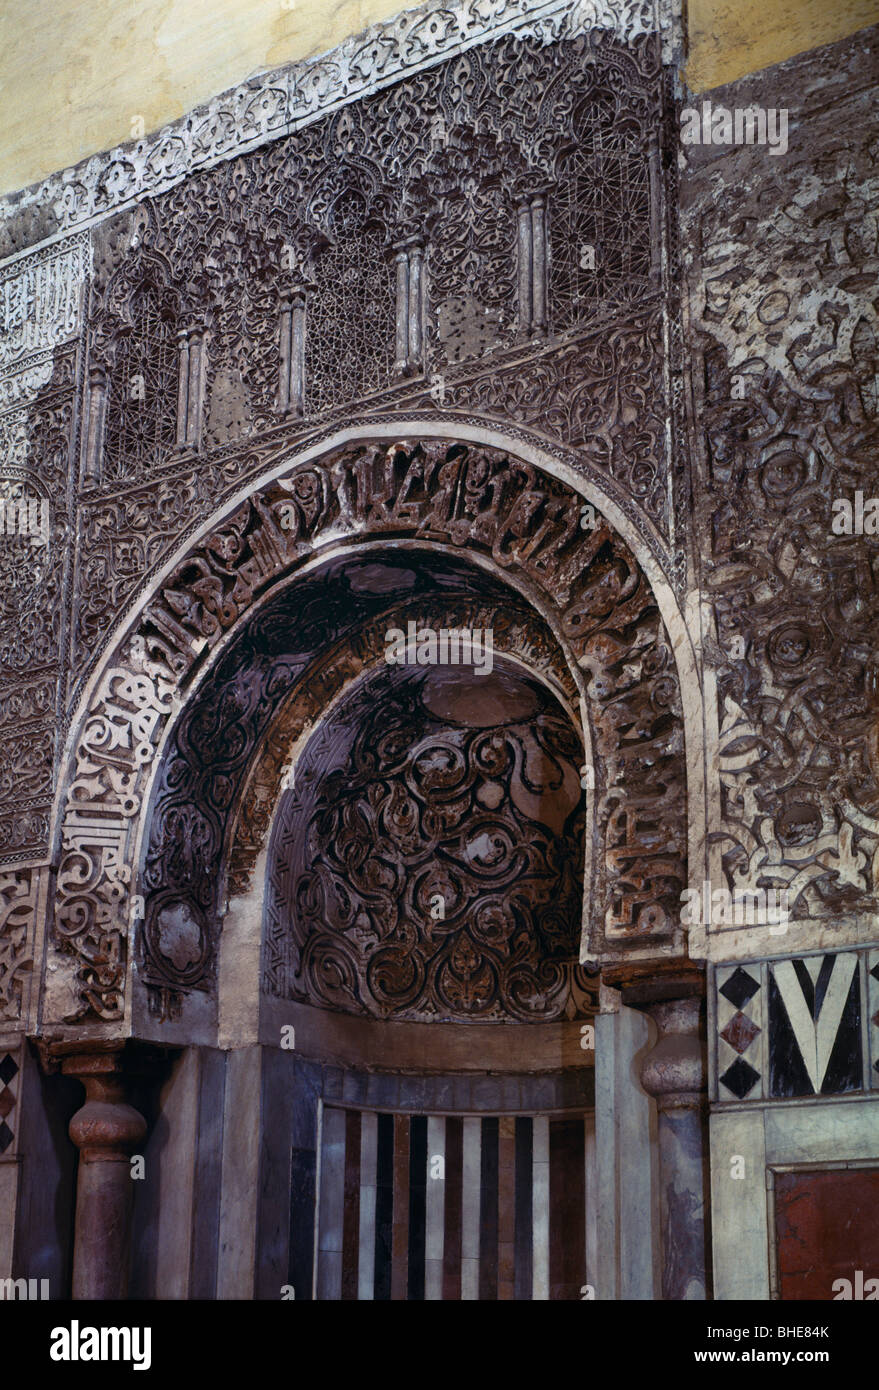 Al-Azhar Mosque , Cairo. Founded 972 AD. Original Fatimid stucco decoration of mihrab (the inscription band), Stock Photo